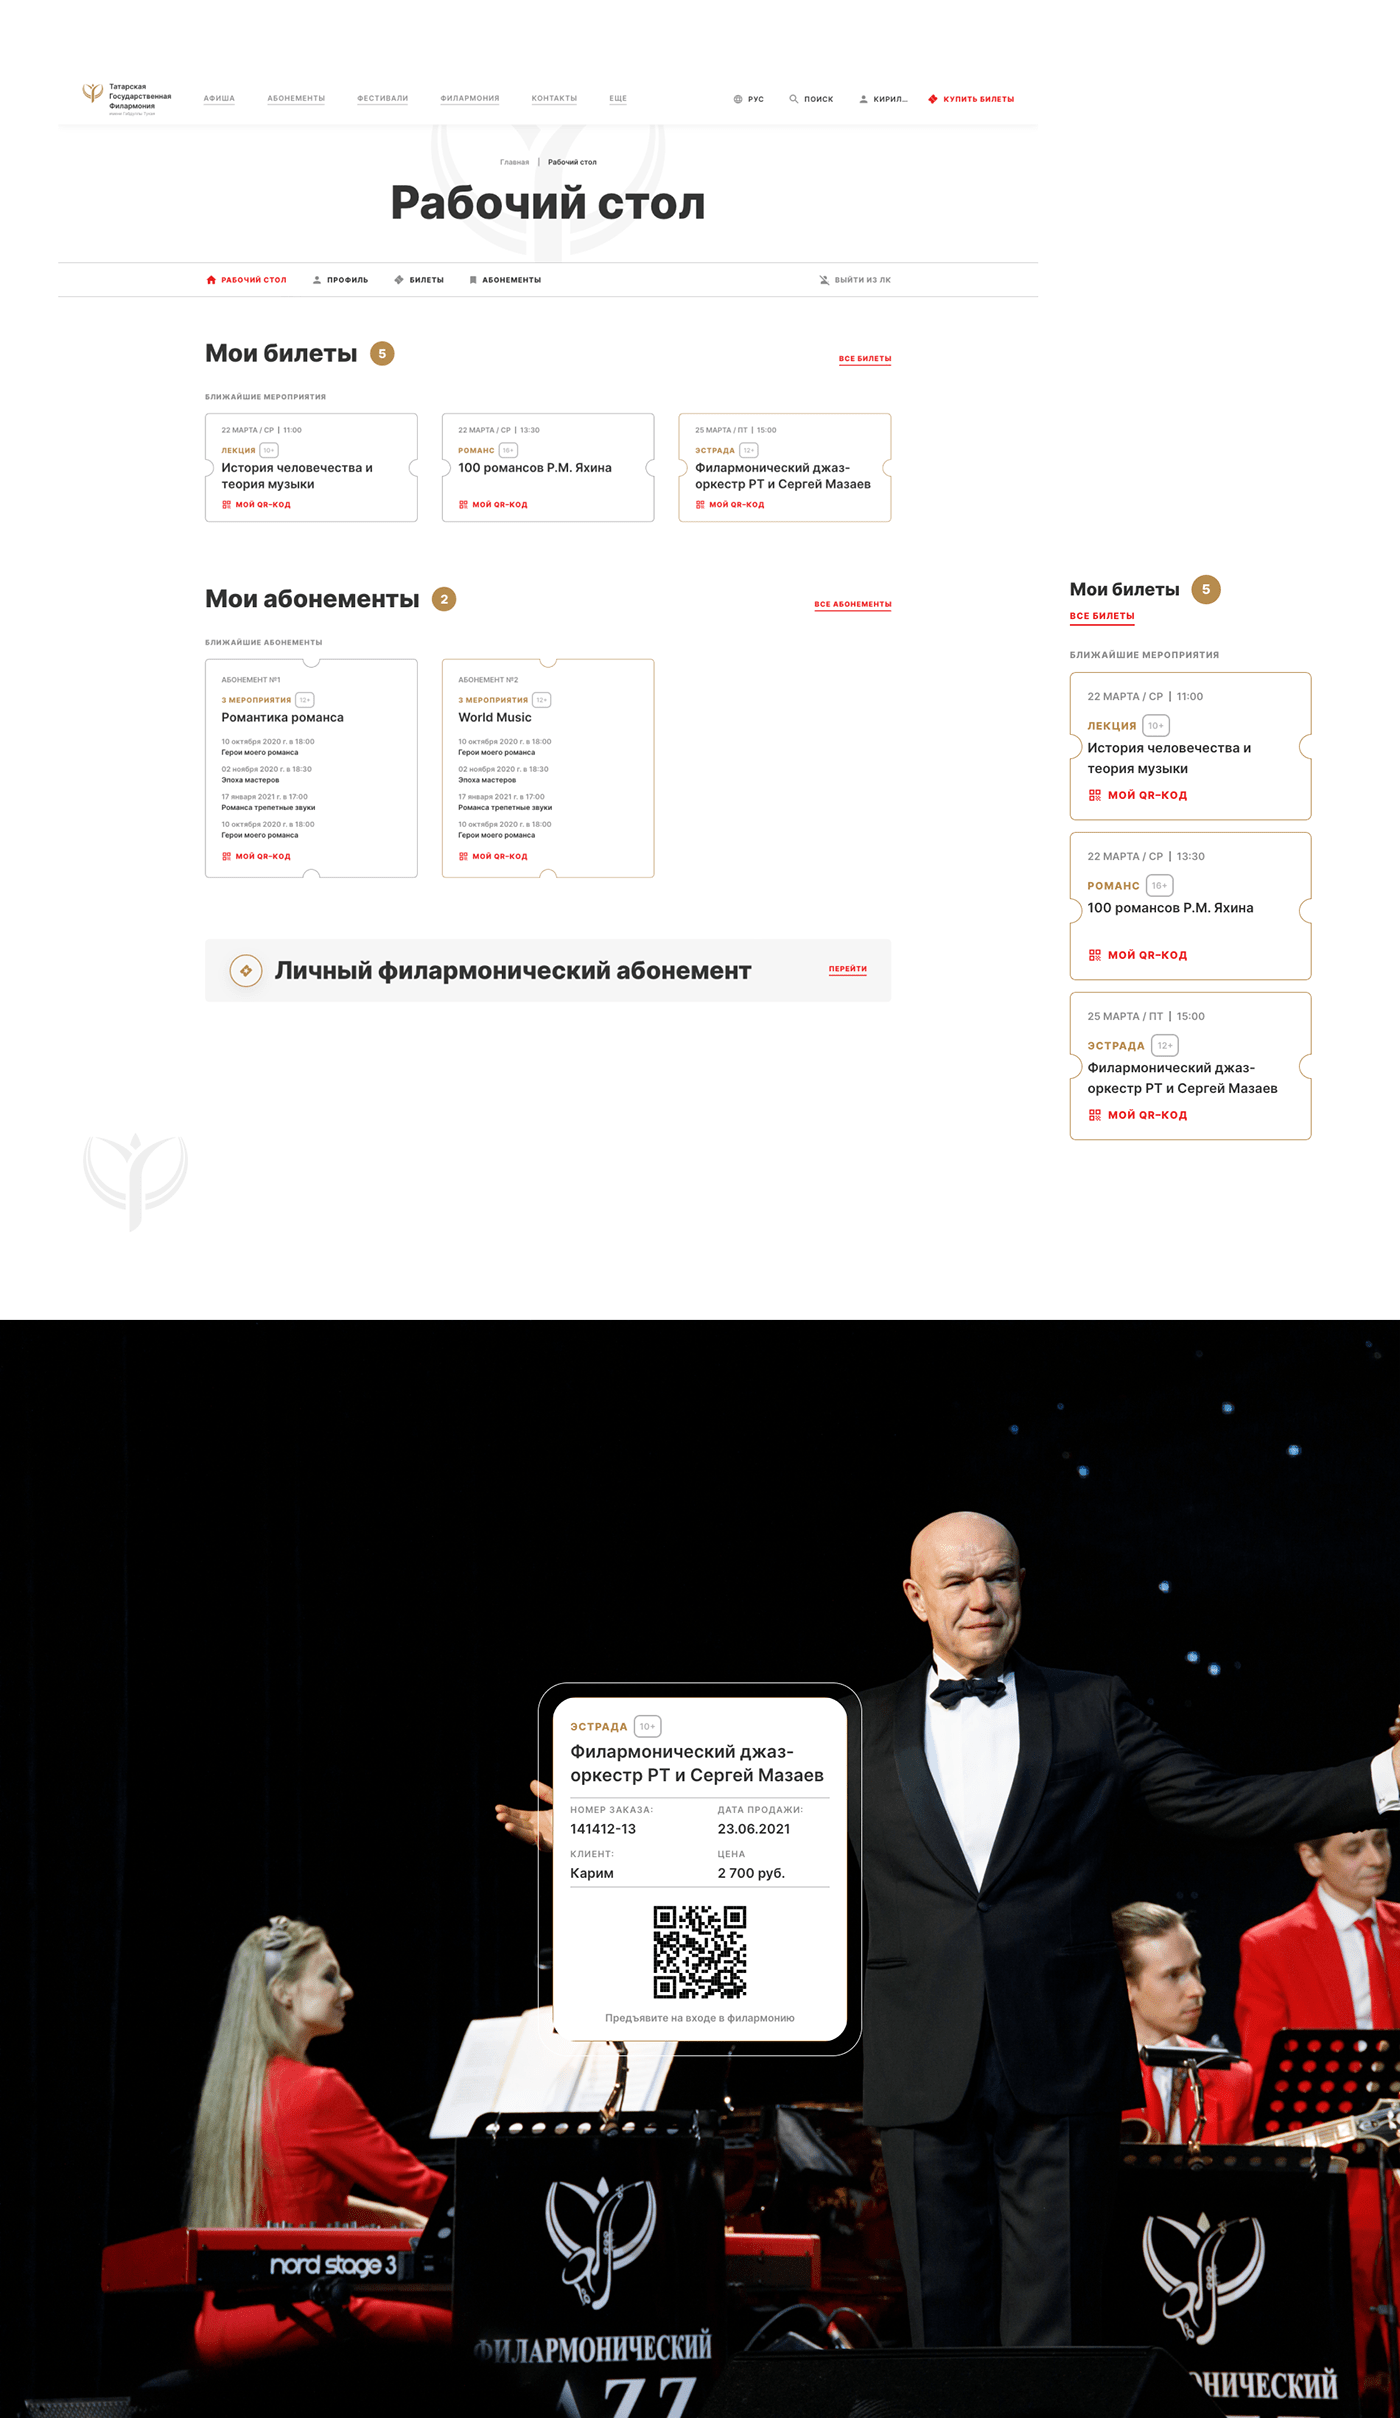 concert design interaction philharmonic Photography  purchase redesign ticket UI/UX Website